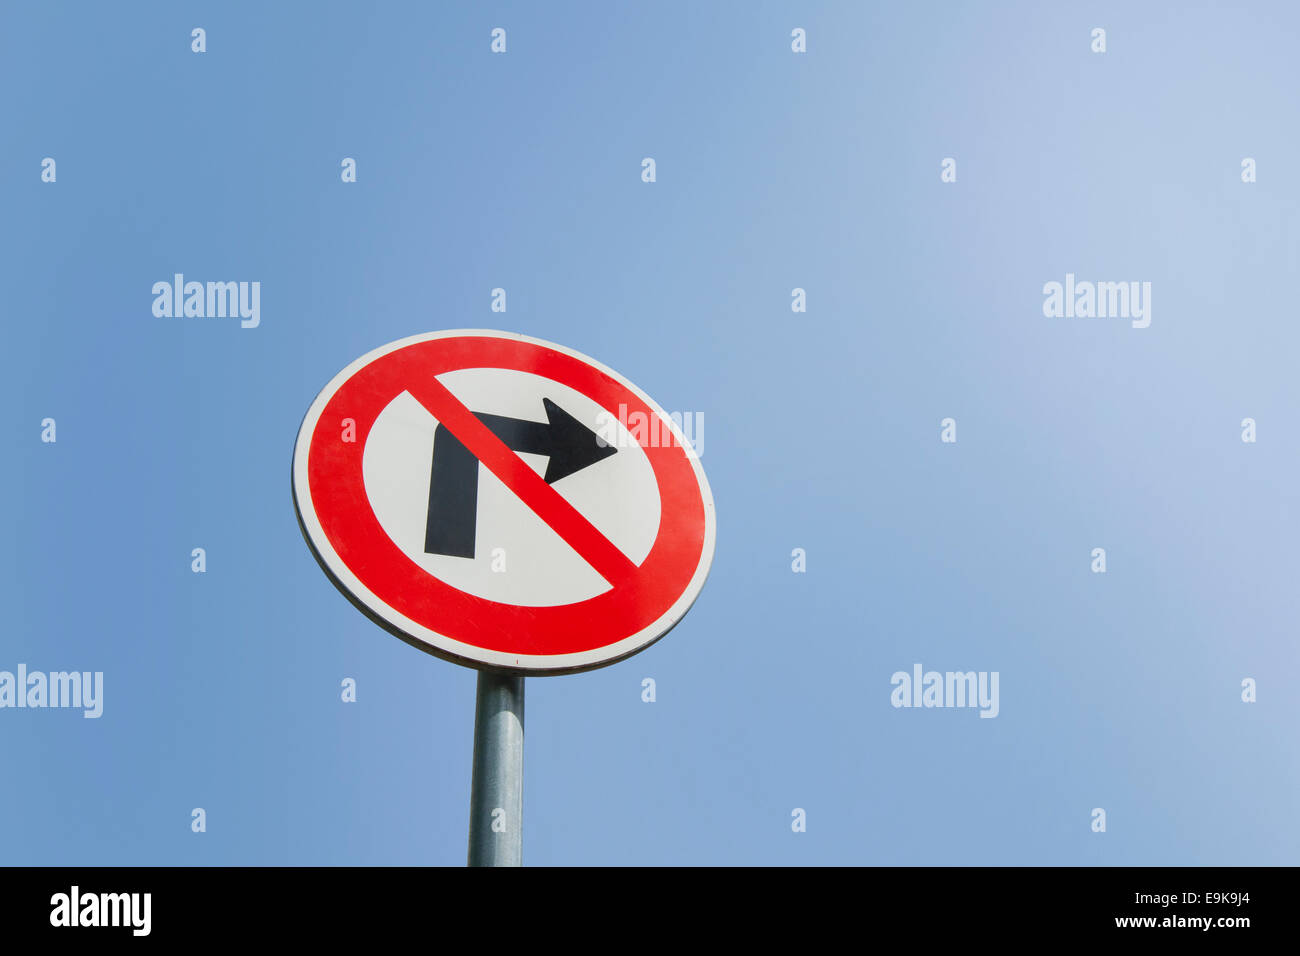 Low angle view of no right turn sign against clear sky Stock Photo